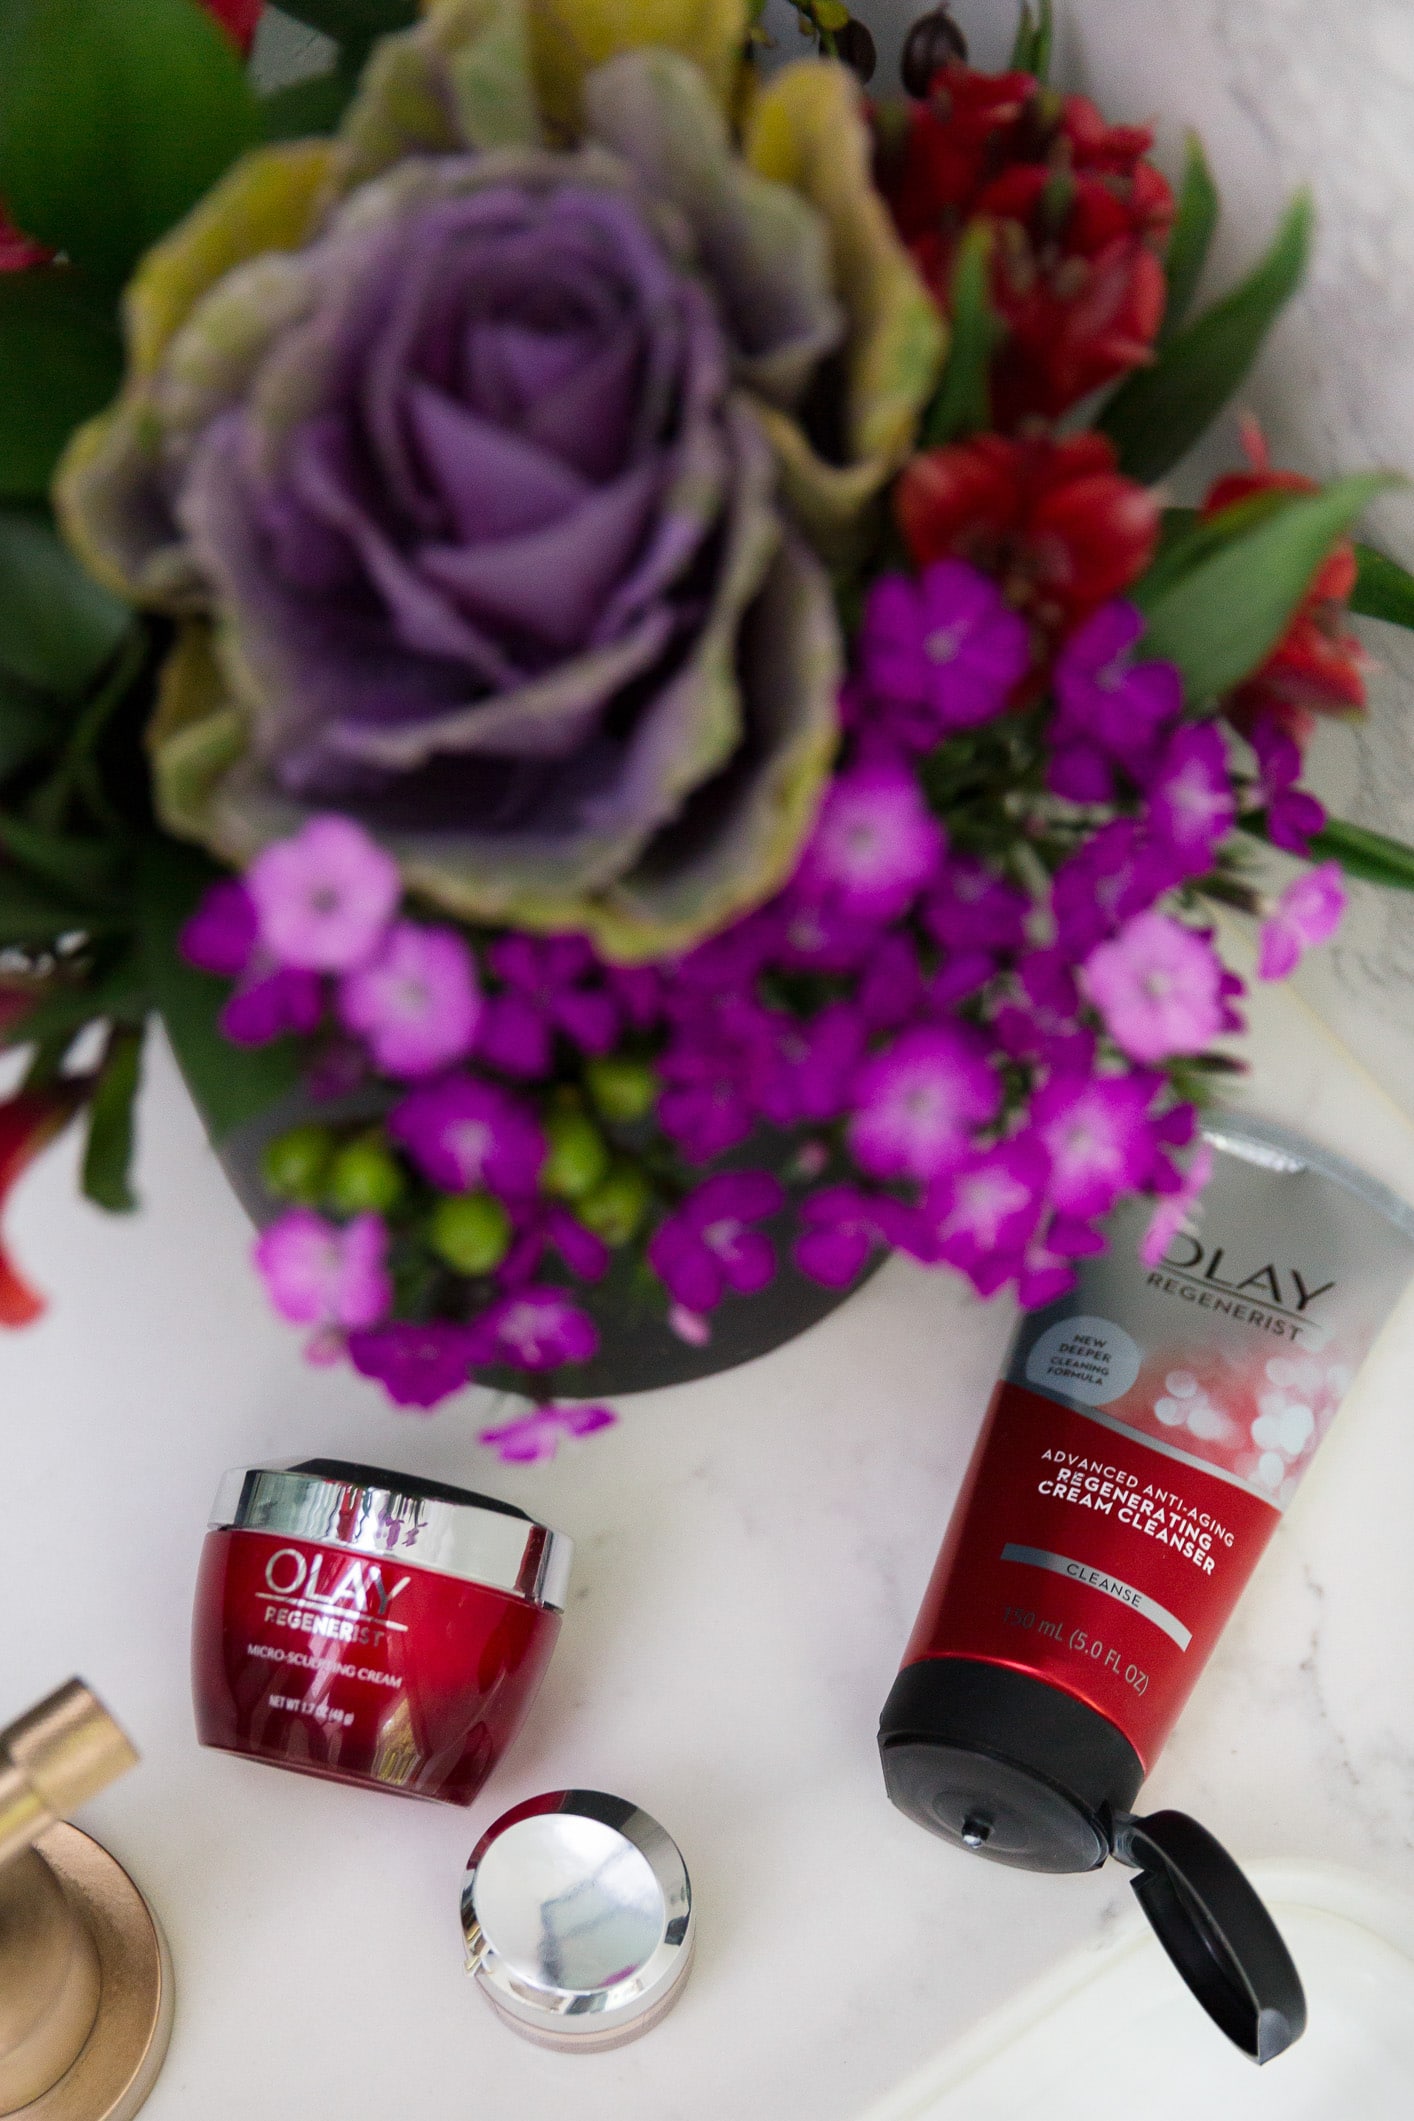 Louise Roe Beauty Secrets | Olay 28 Day Challenge Results